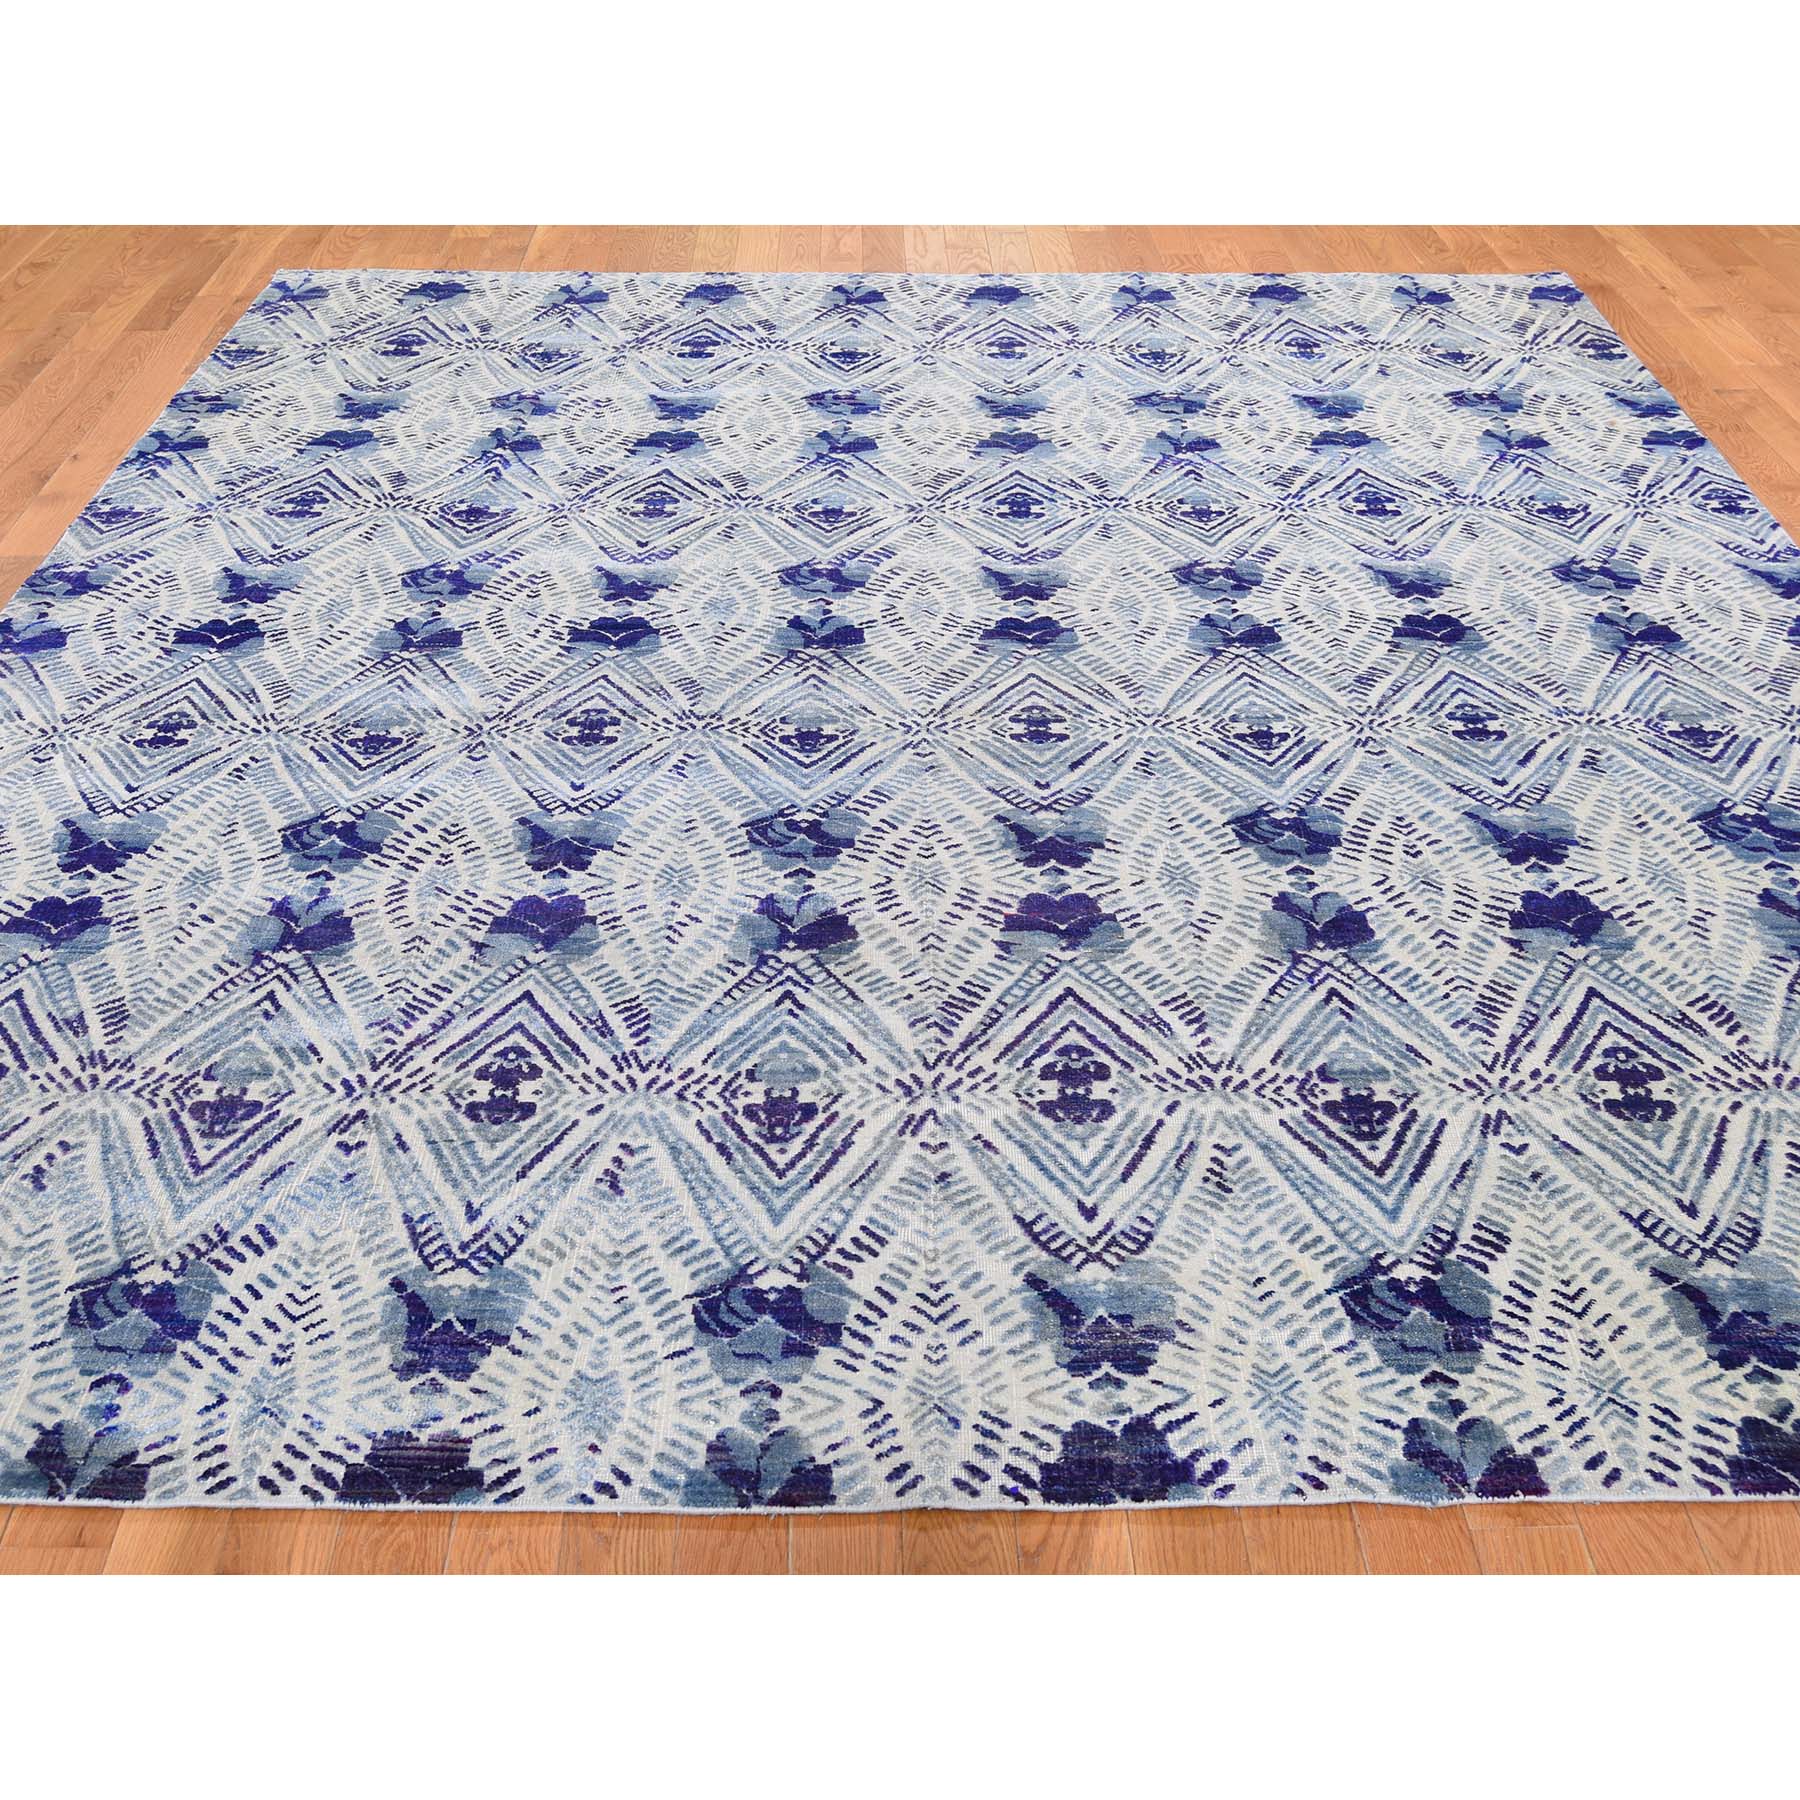 8-x10- Sari Silk With Textured Wool Hand-Knotted Ikat Design Oriental Rug 